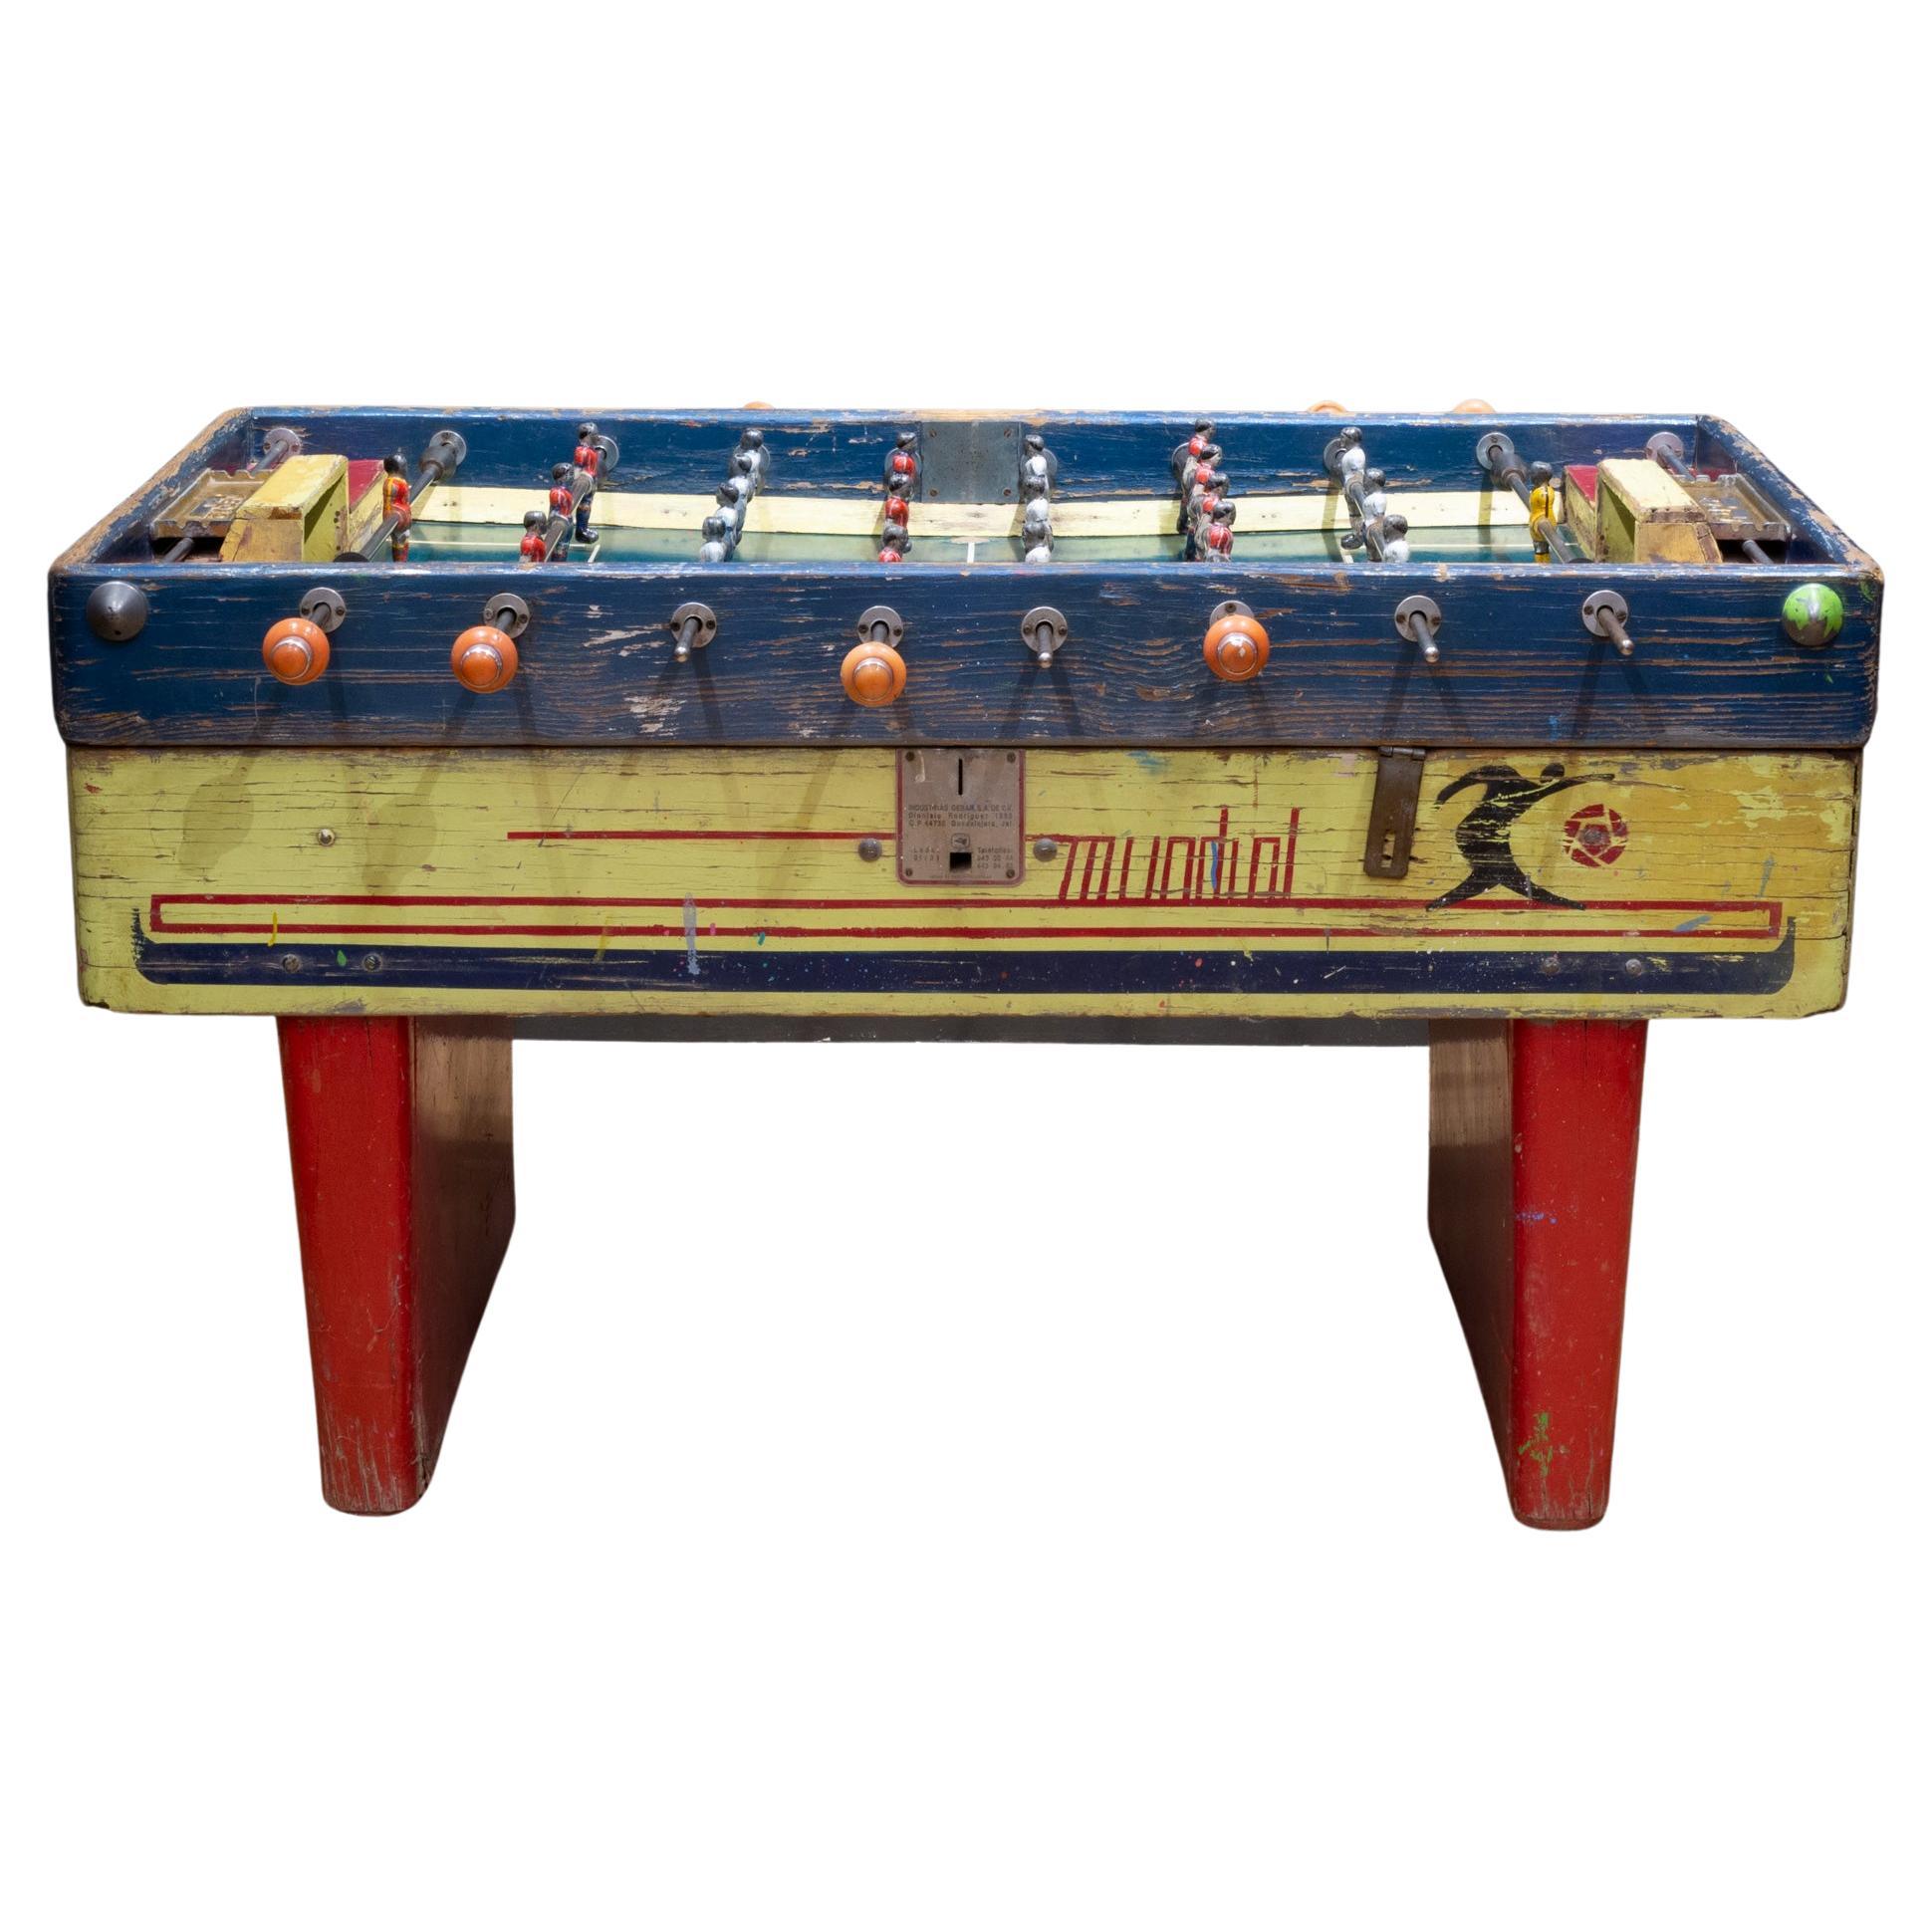 Early 20th Century Mexican Foosball Table with Metal Players, circa 1940 For Sale